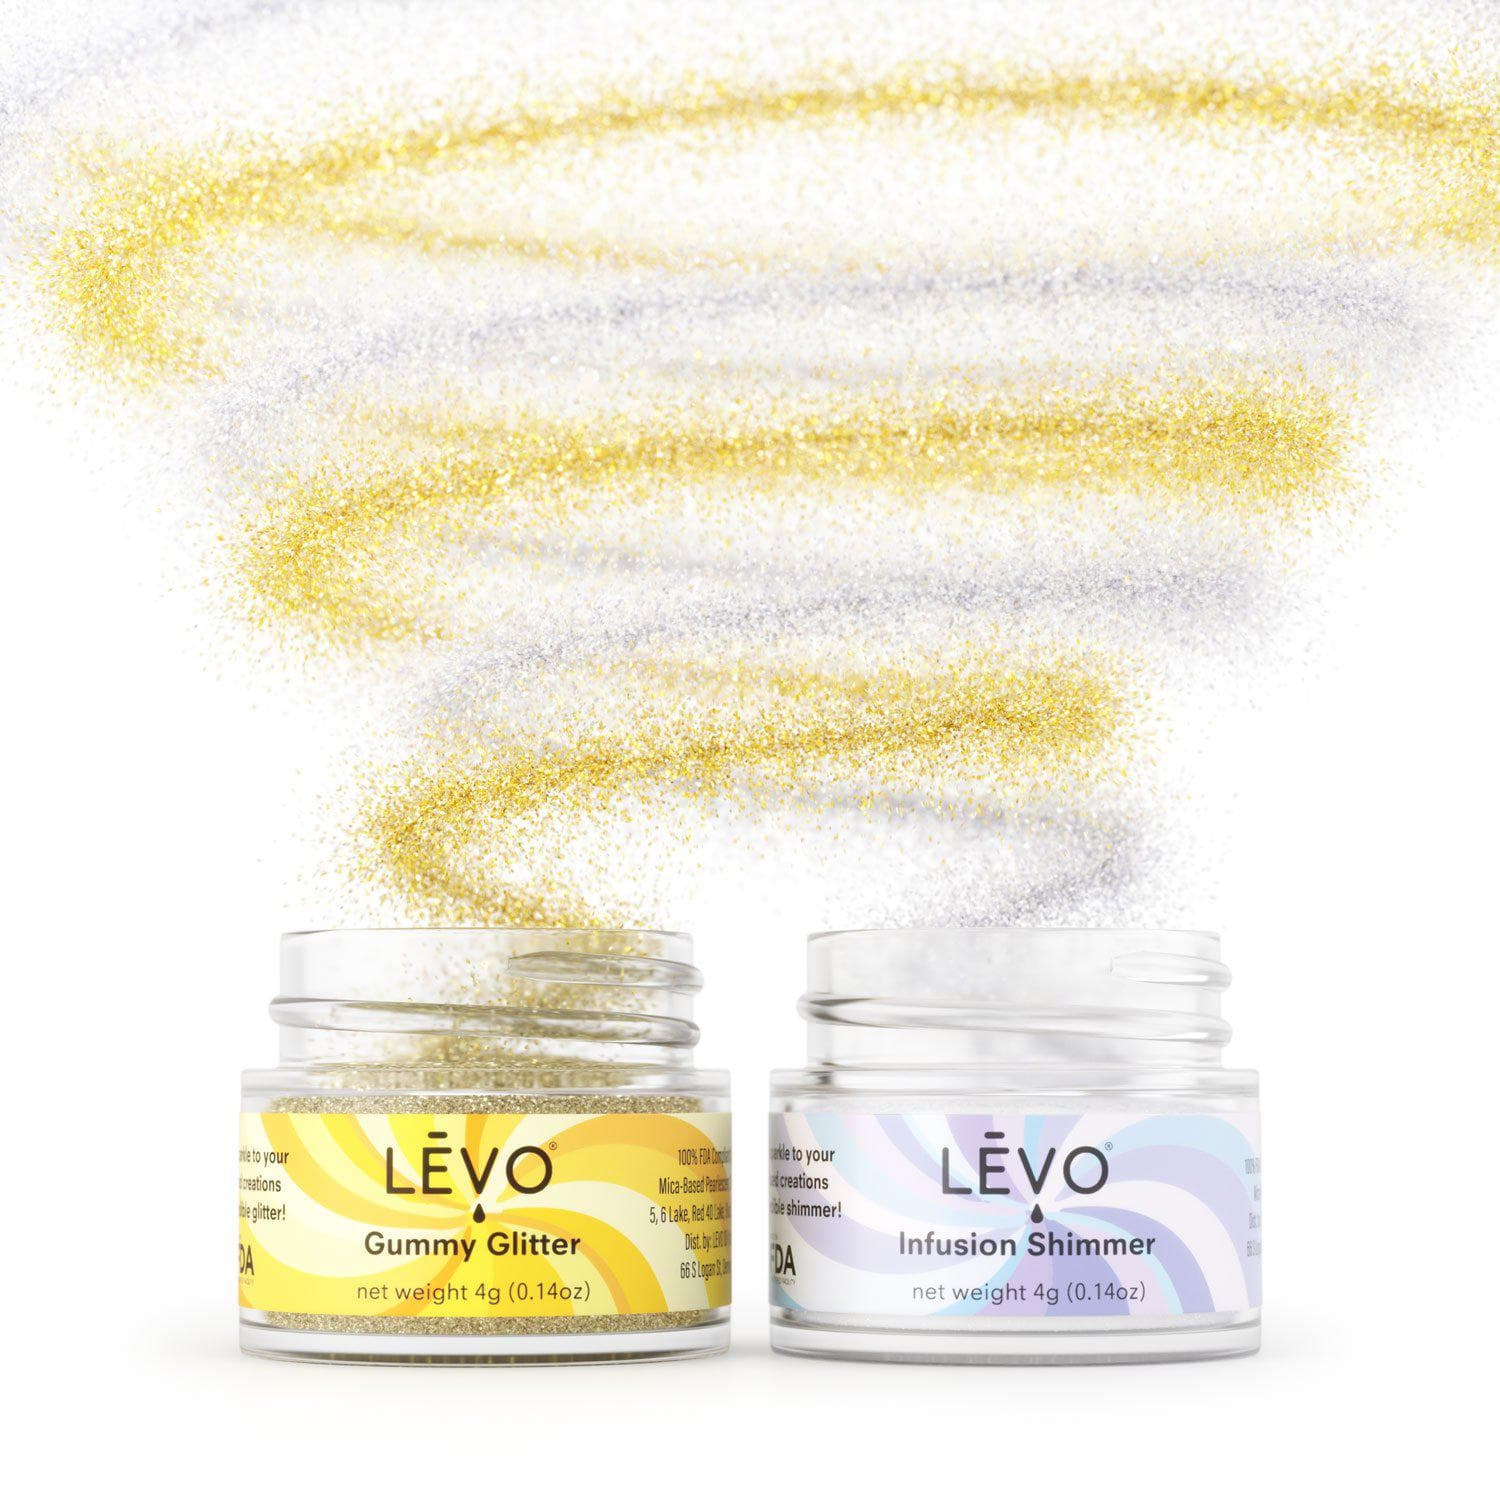 Shimmer and shine with LEVO edible glitter and iridescent sparkle. Sprinkle it onto any food or drink you like. Elevate your edibles with the Gummy Glitter + Infusion Shimmer Kit, featuring gold edible gummy glitter and iridescent infusion shimmer powder.